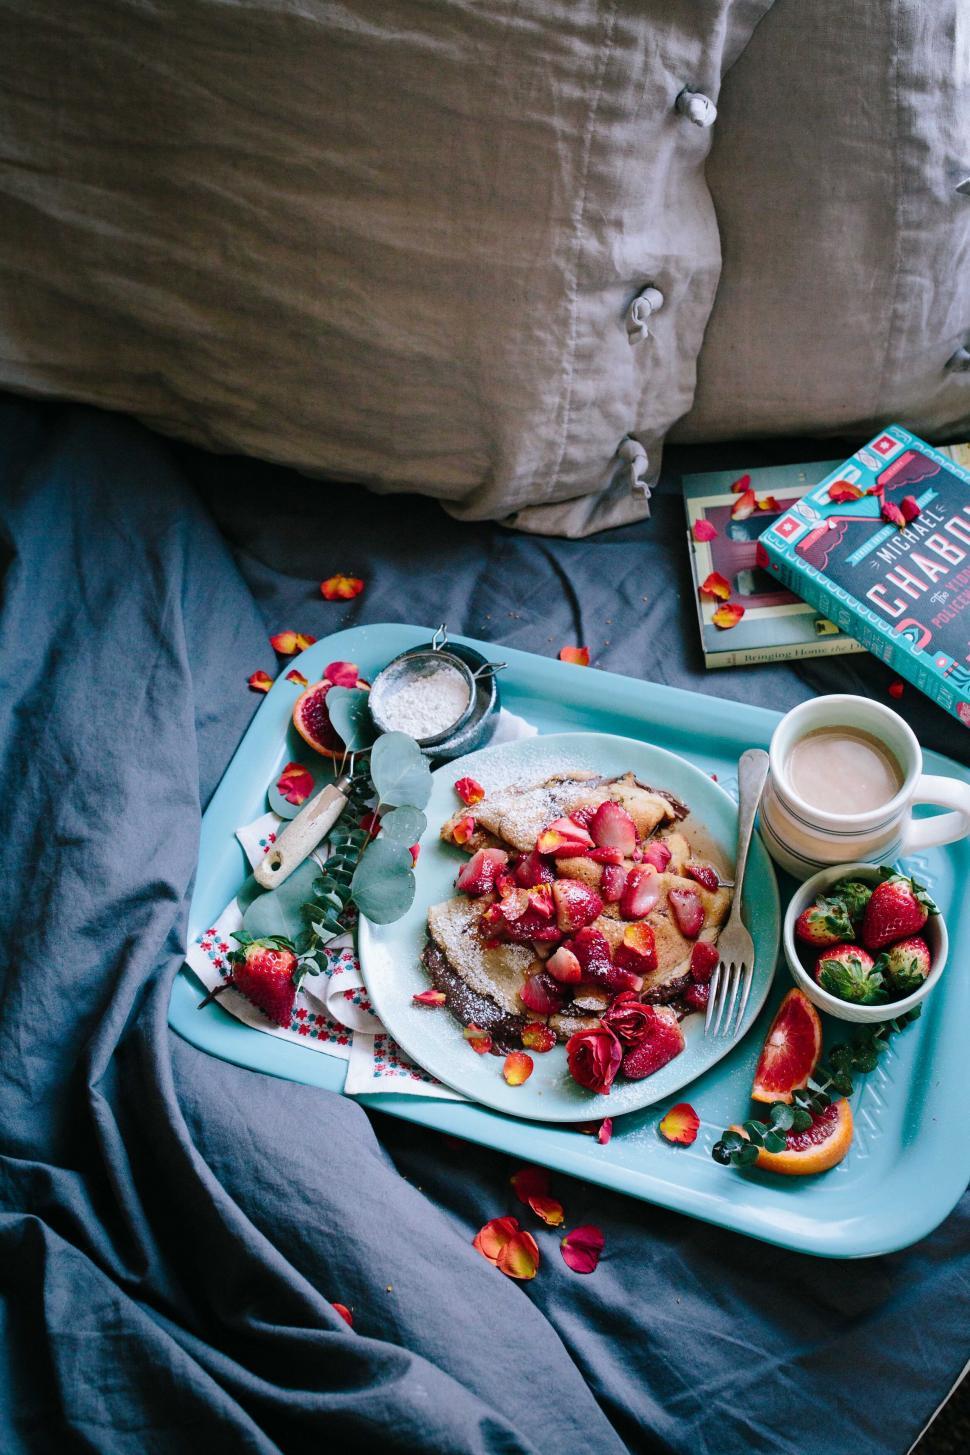 Free Image of Breakfast in bed with a book and fresh fruits 